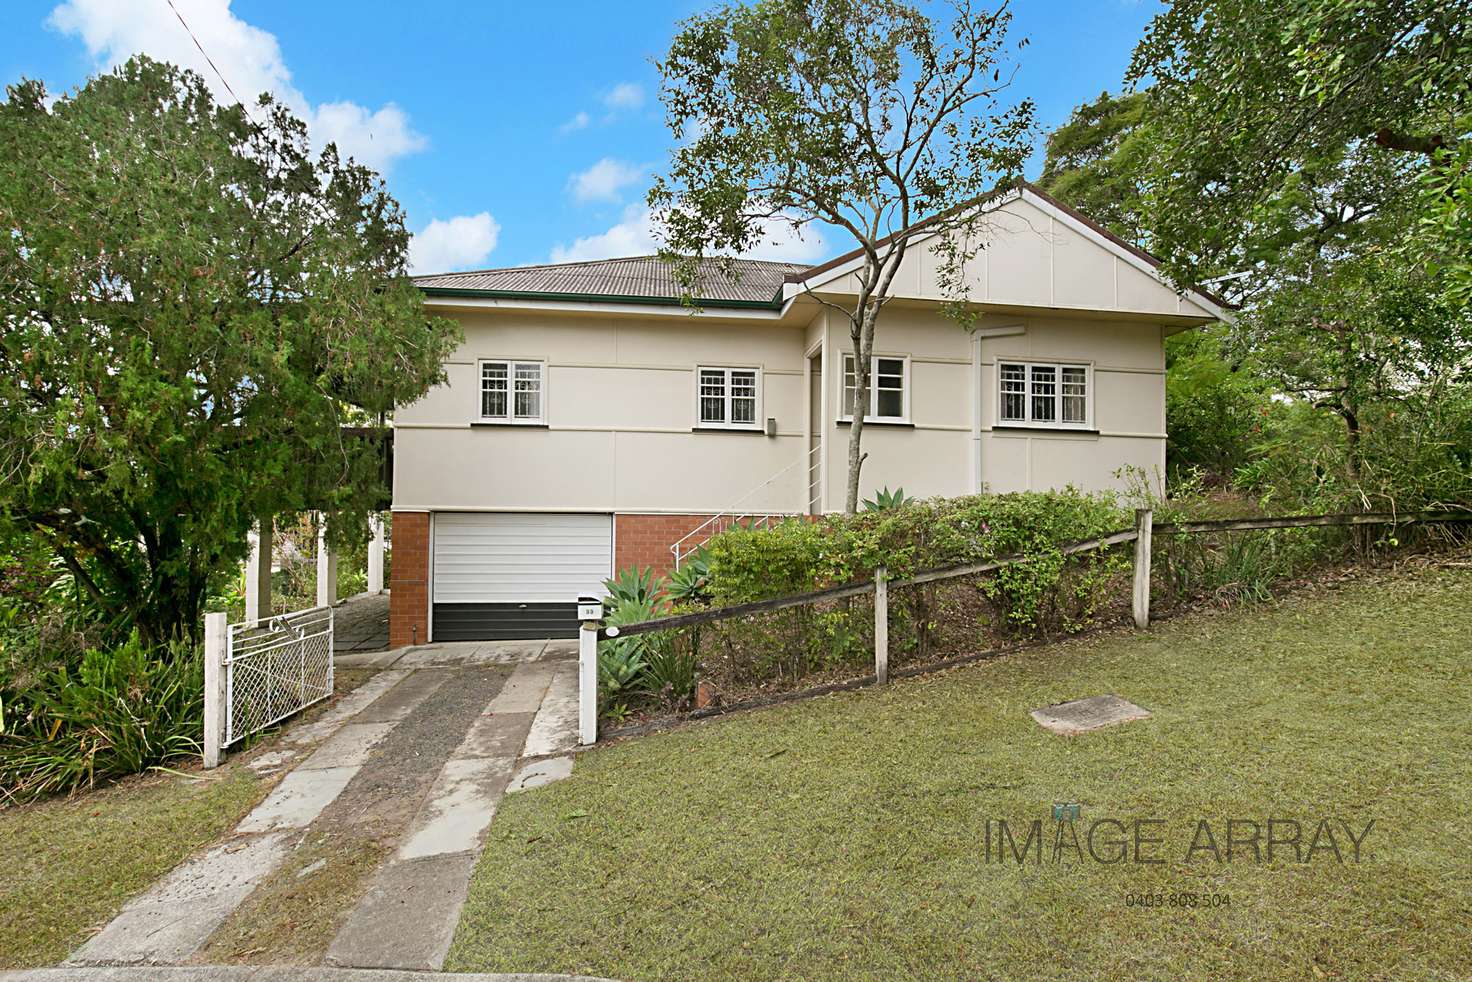 Main view of Homely house listing, 33 Henderson St, Oxley QLD 4075